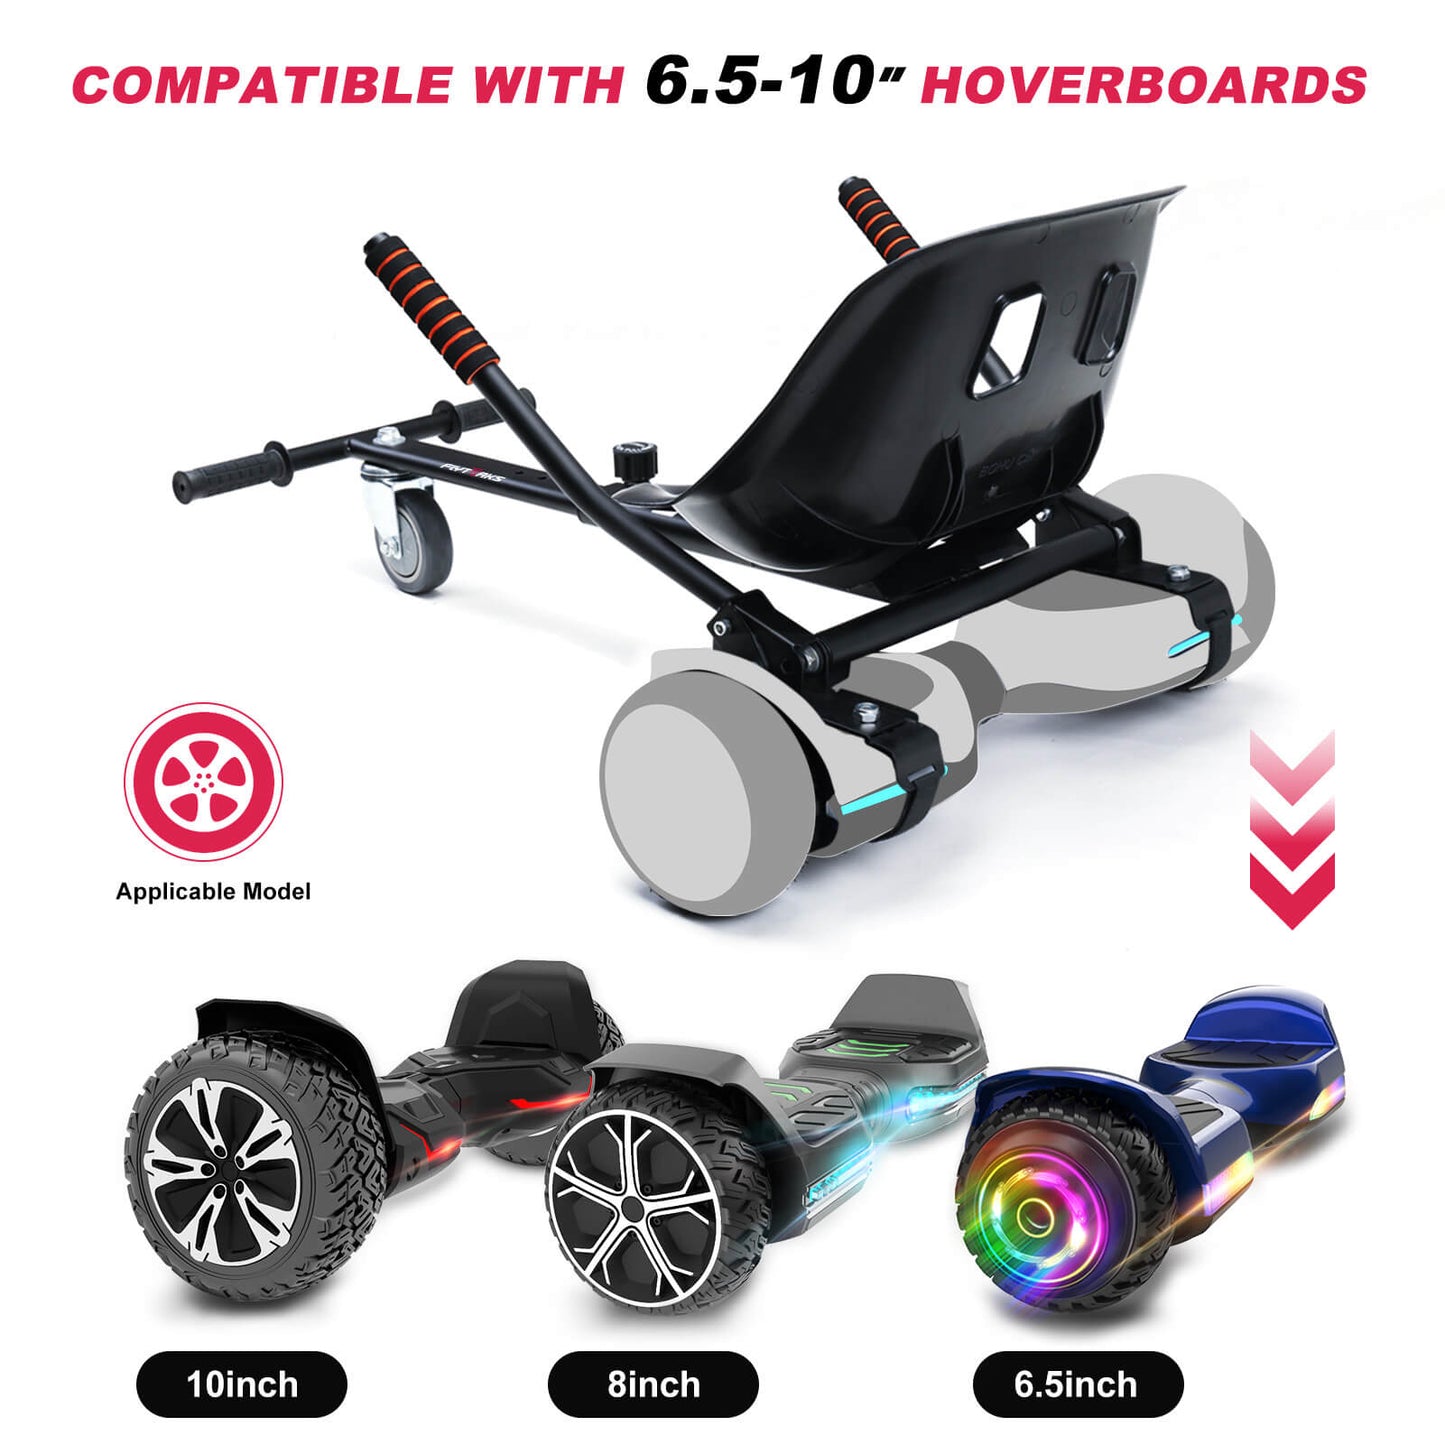 Flytraks Hoverboard Seat Attachment K1, Hover Board Accessory Go Kart with Adjustable Frame Length Compatible with 6.5'' 8'' 10'' Hoverboard,